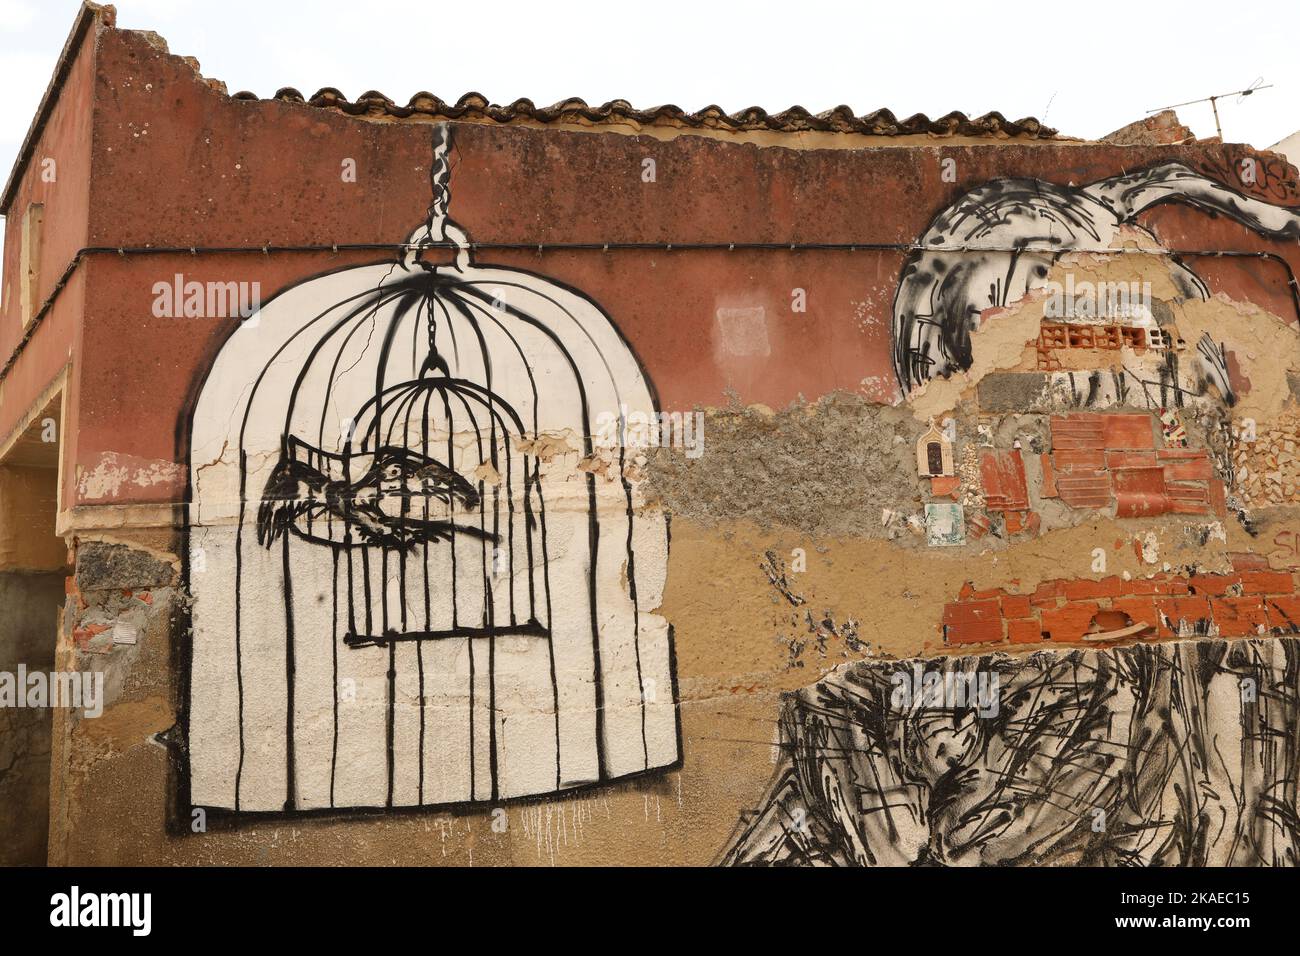 Graffiti on a wall of a bird in a cage, Lagos, Algarve, Portugal Stock Photo